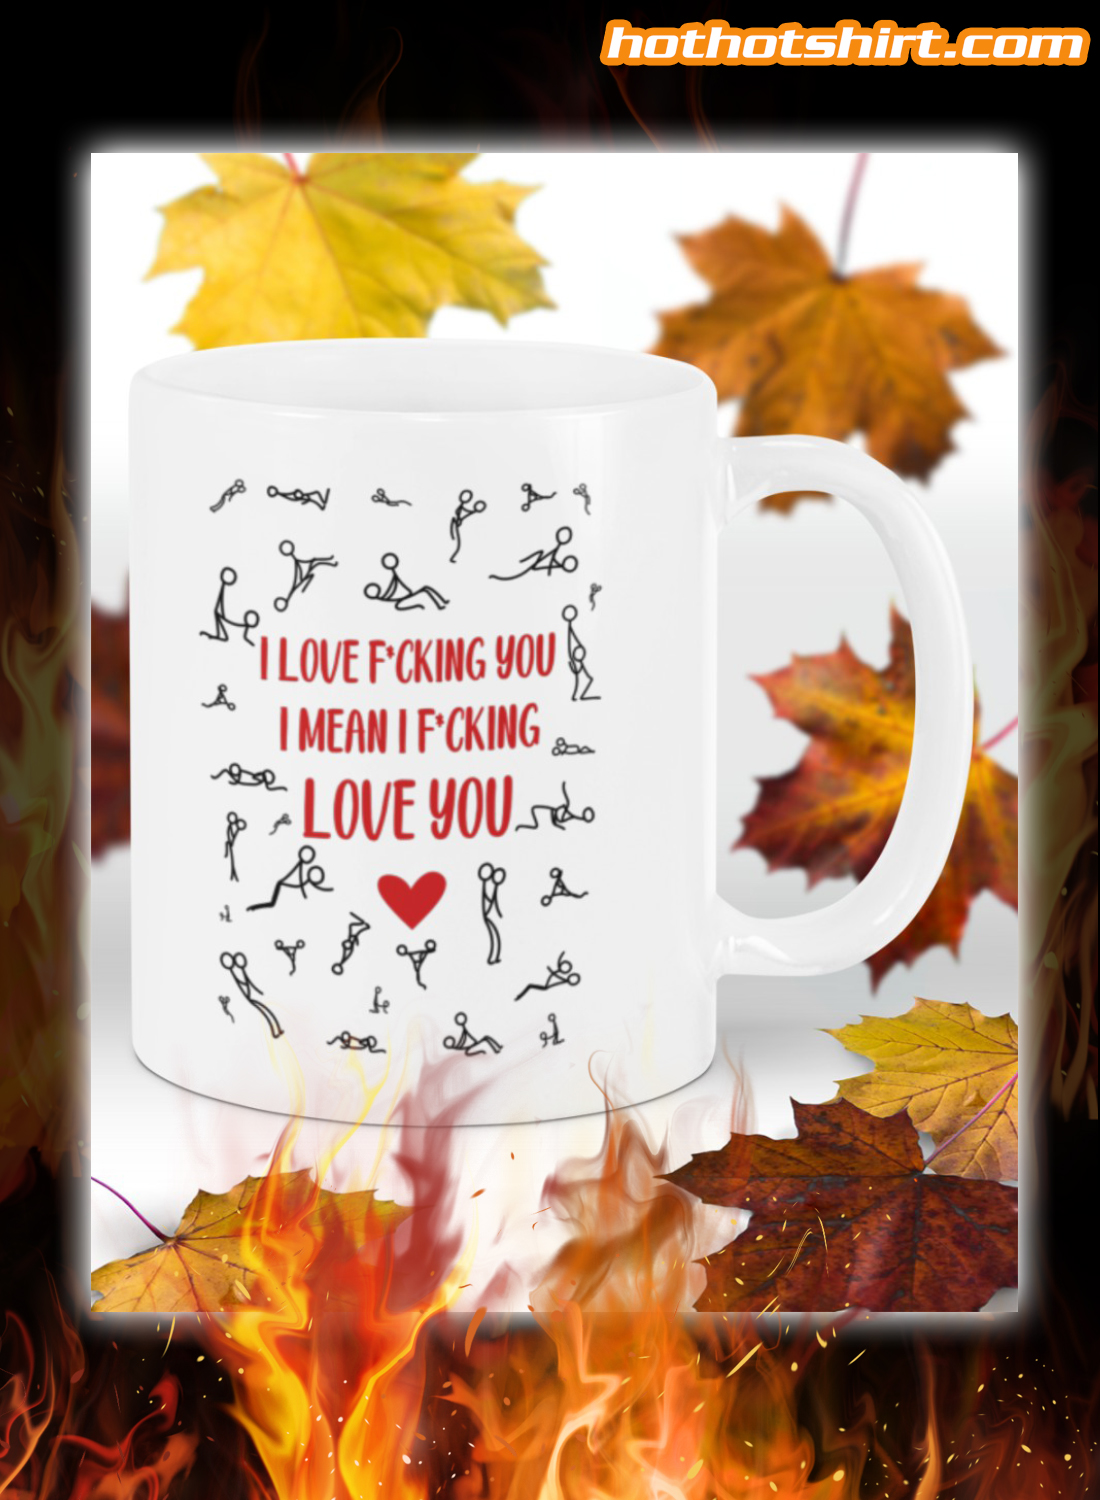 I promise to alway be by your side on under you or on top mug